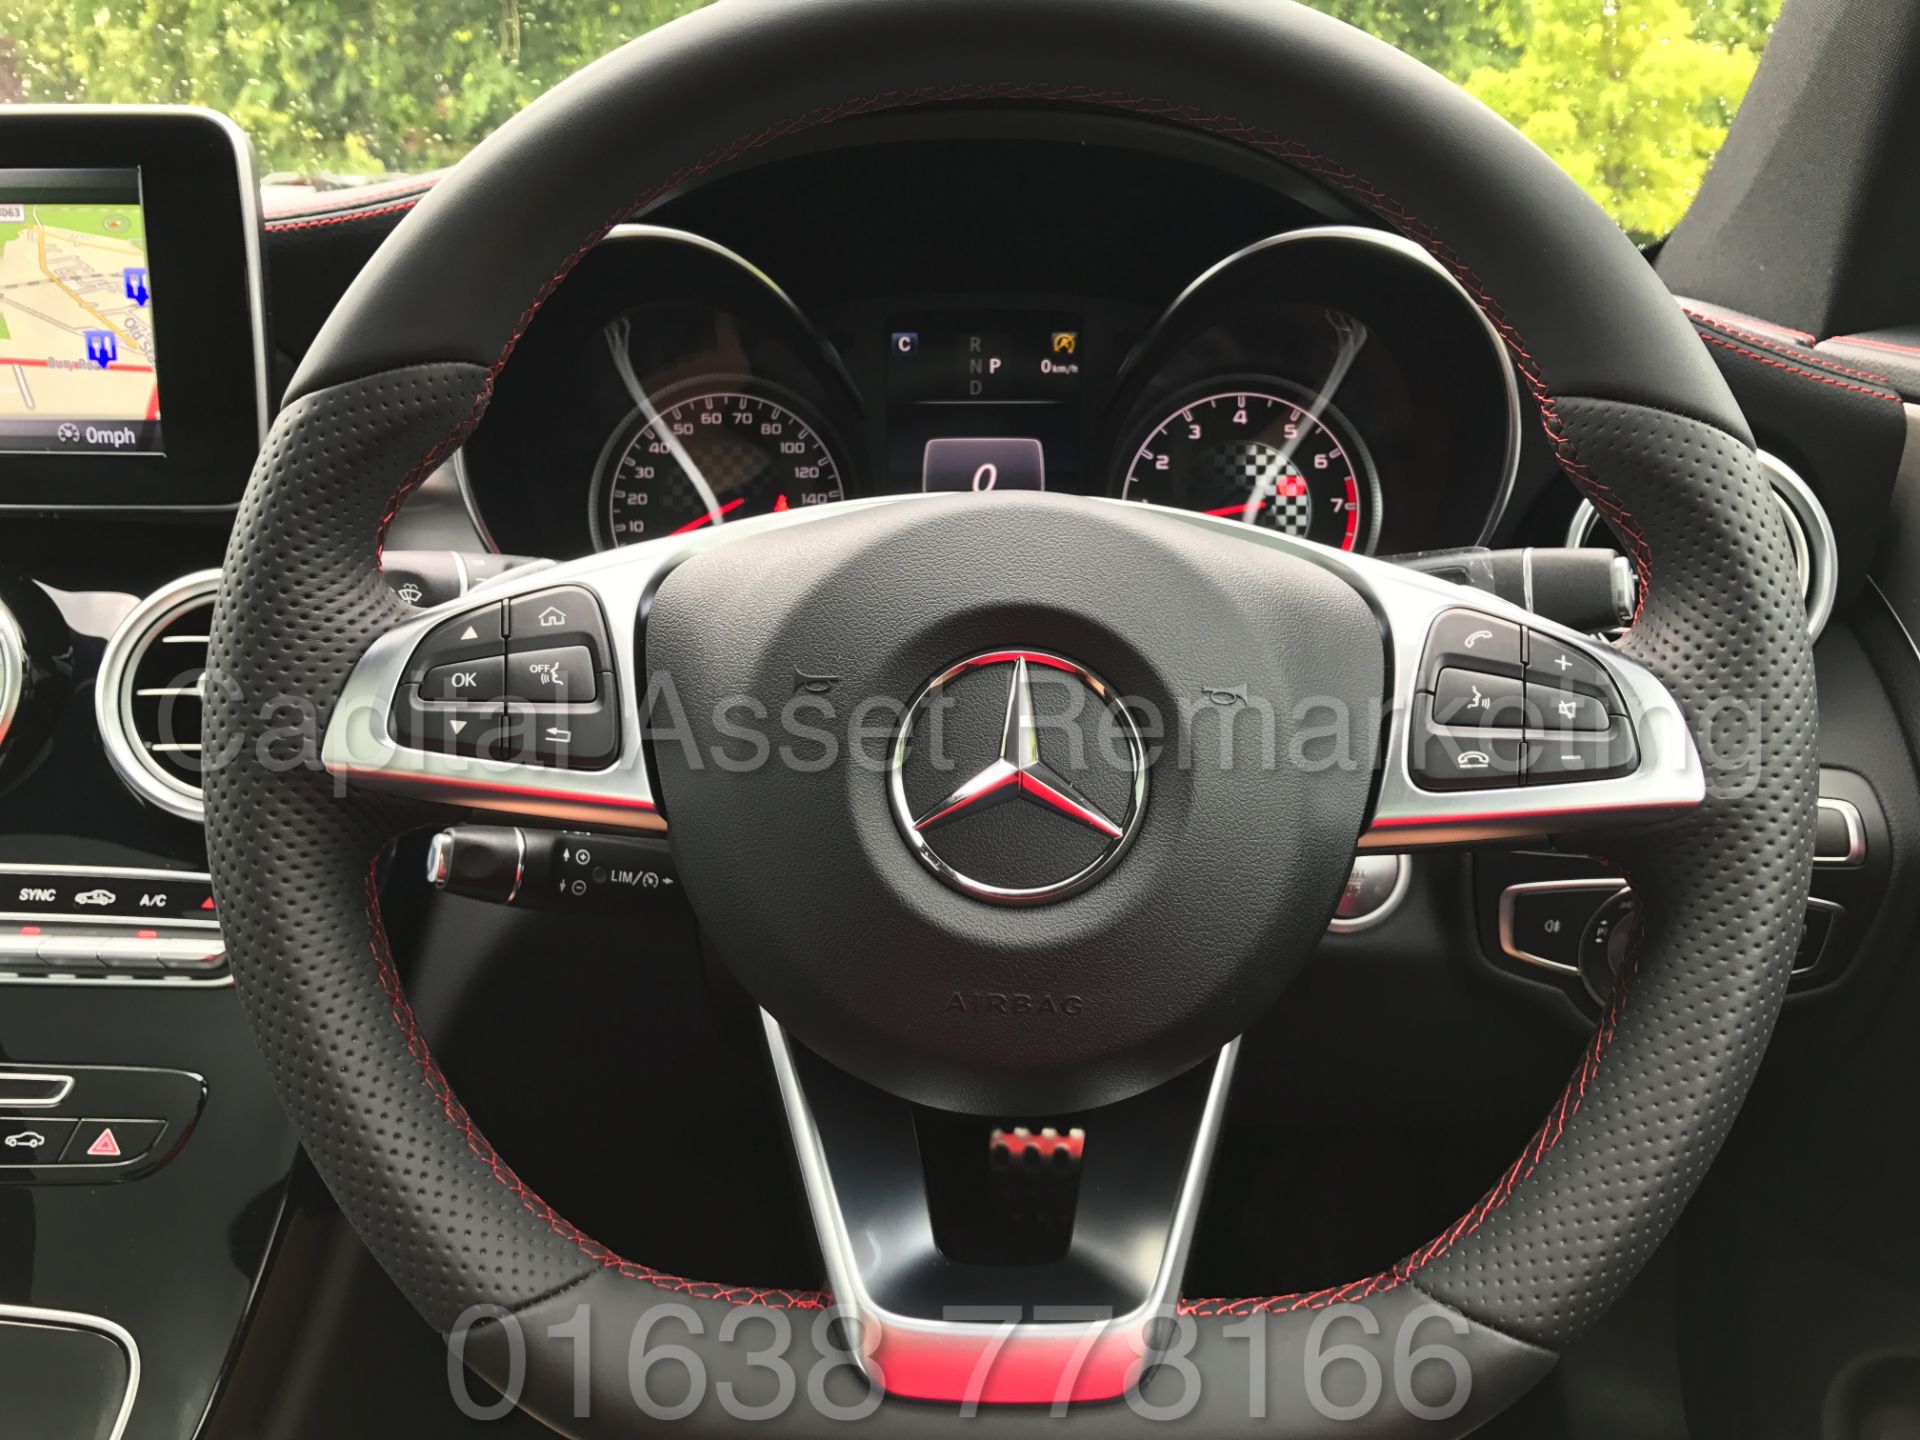 MEREDES-BENZ C43 AMG PREMIUM '4 MATIC' COUPE (2017) '9-G AUTO - LEATHER - SAT NAV' **FULLY LOADED** - Image 50 of 57